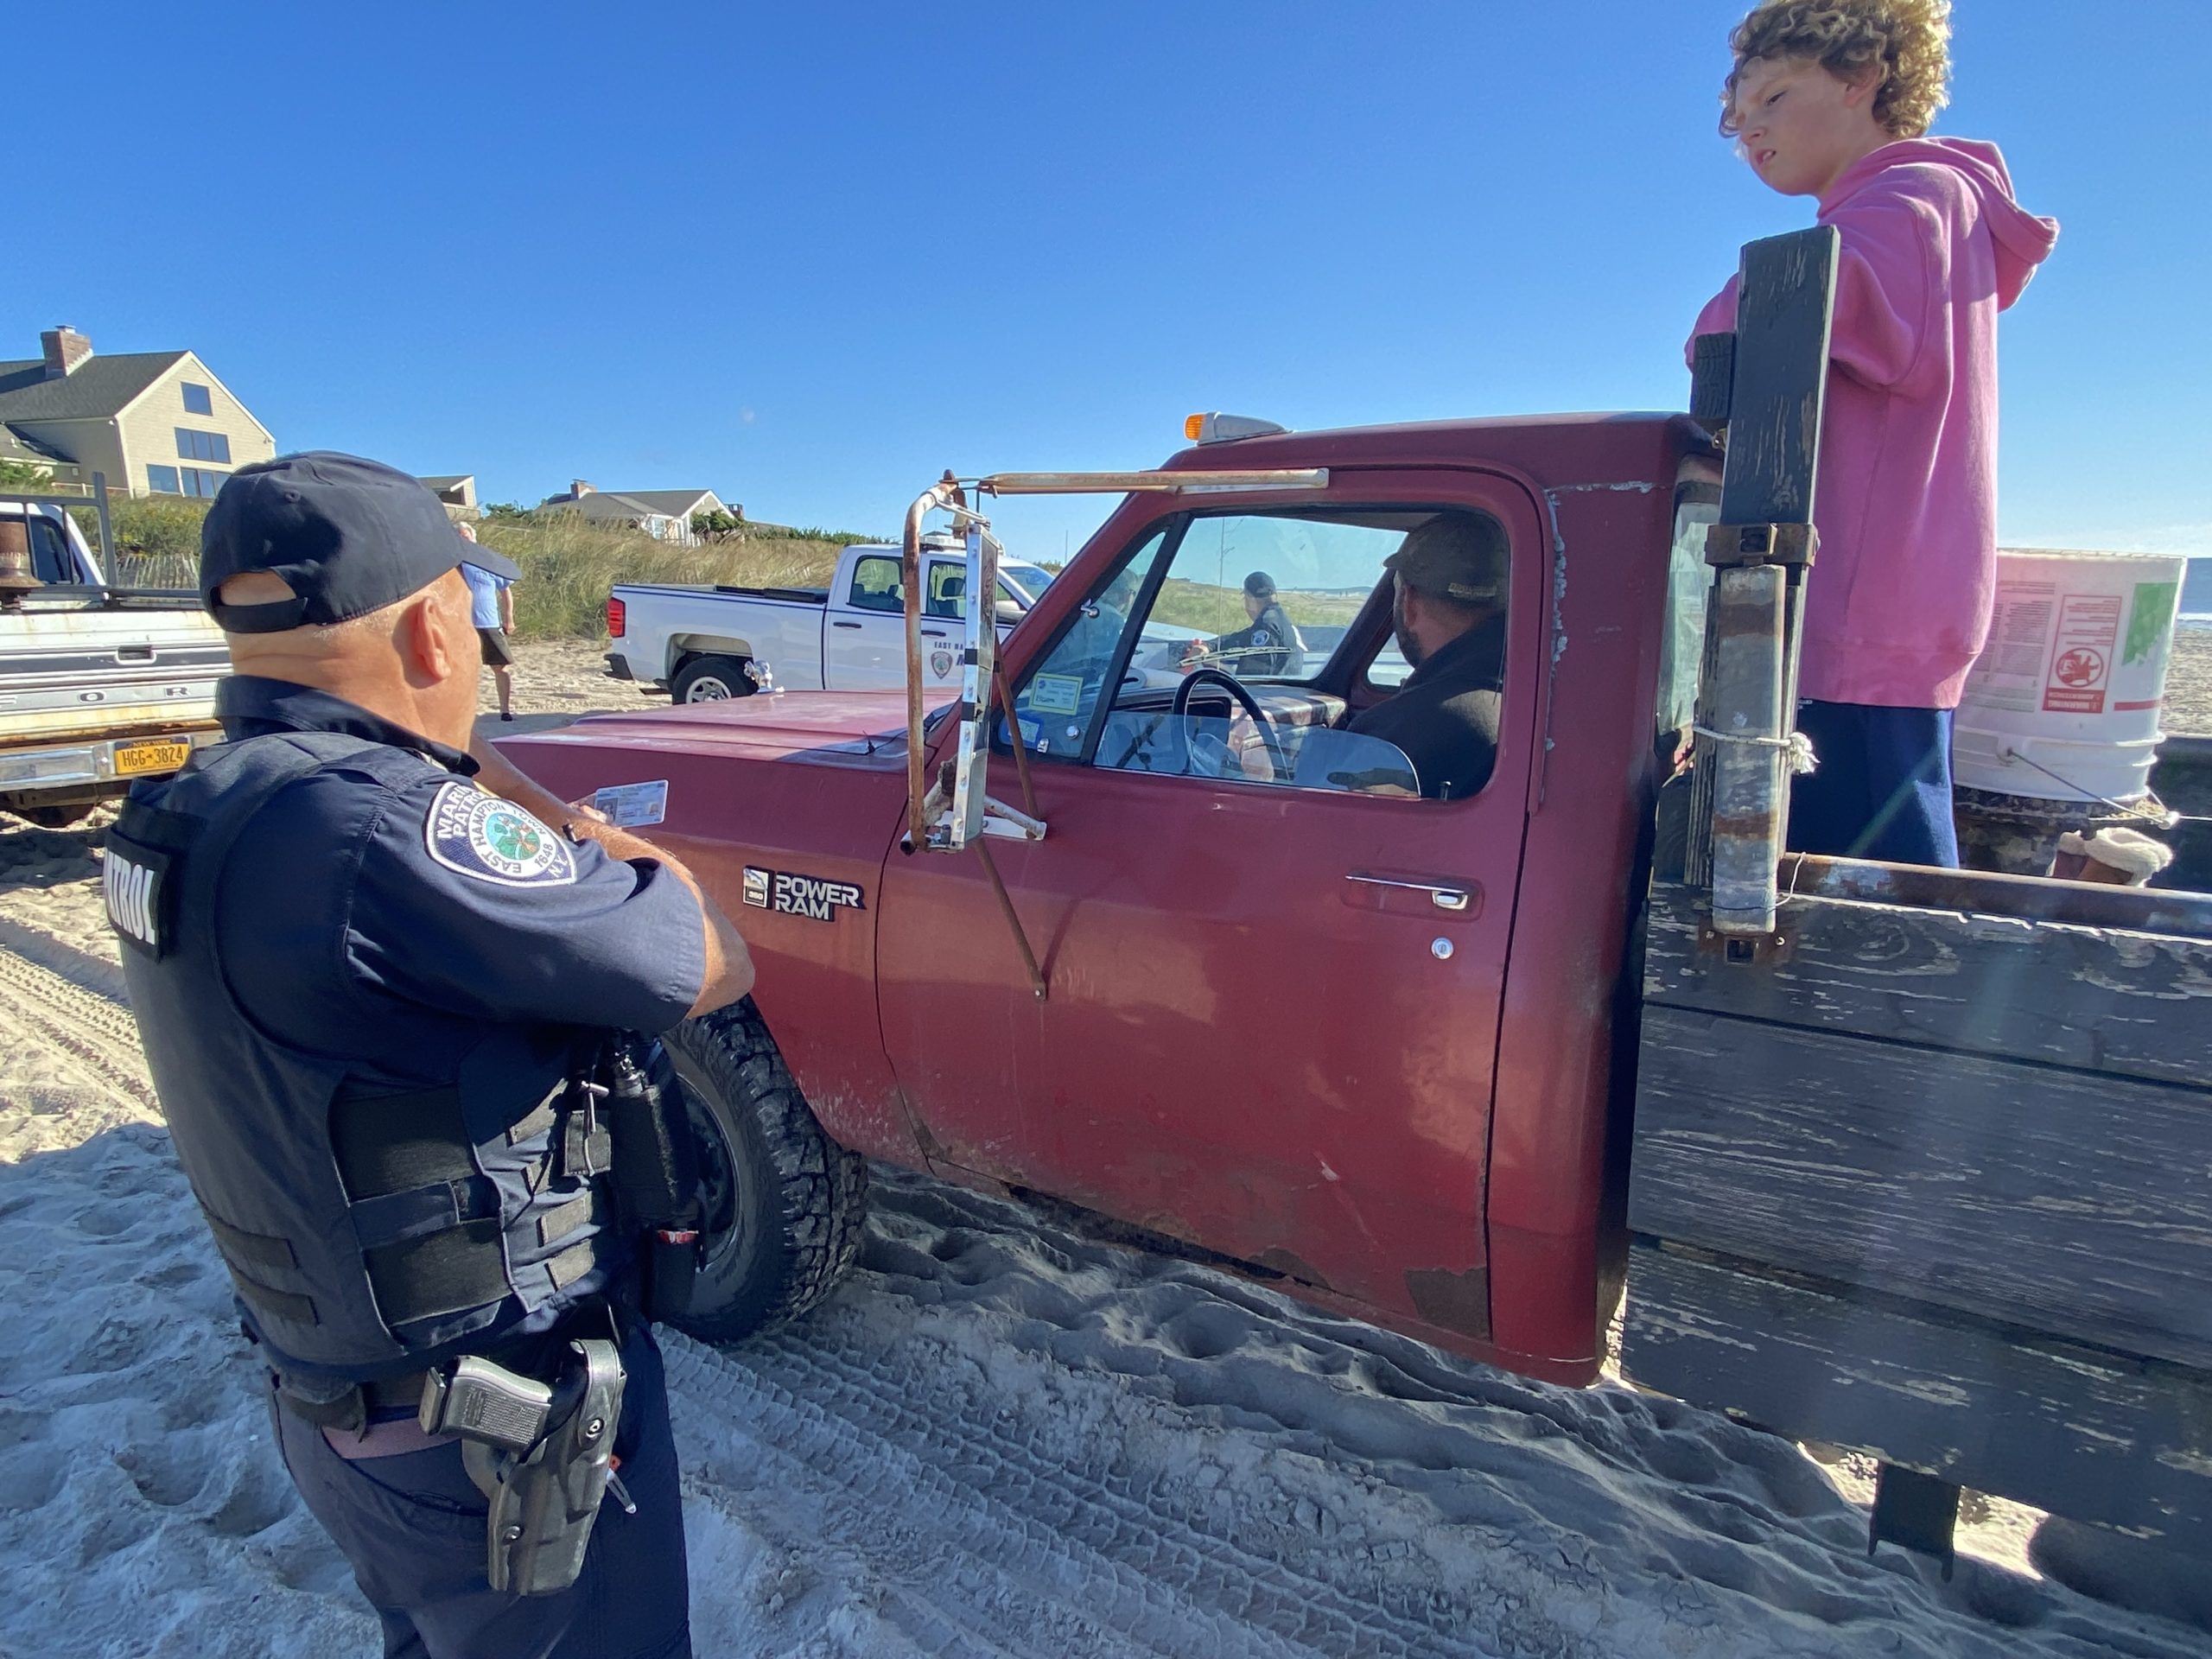 Town Police gave 14 summonses to fishermen in October for violating a court order to keep vehicles off an Amagansett beach. Now the town is asking a court lift that order, and declare the beach accessible for fishing and fishing related purposes.